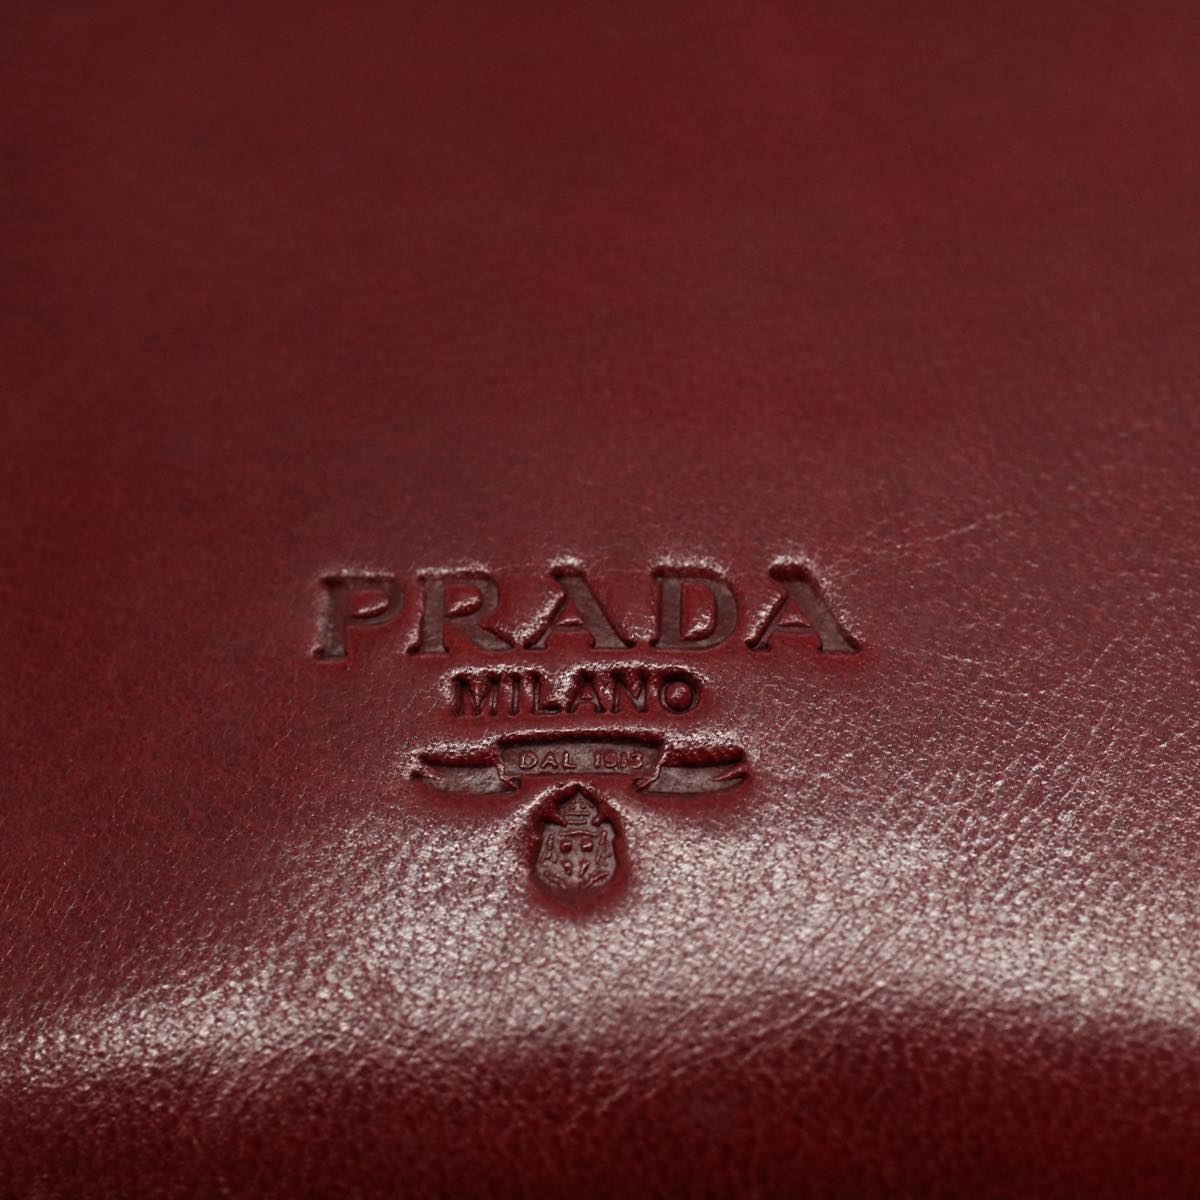 PRADA Chain Shoulder Bag Leather Red Auth am4993